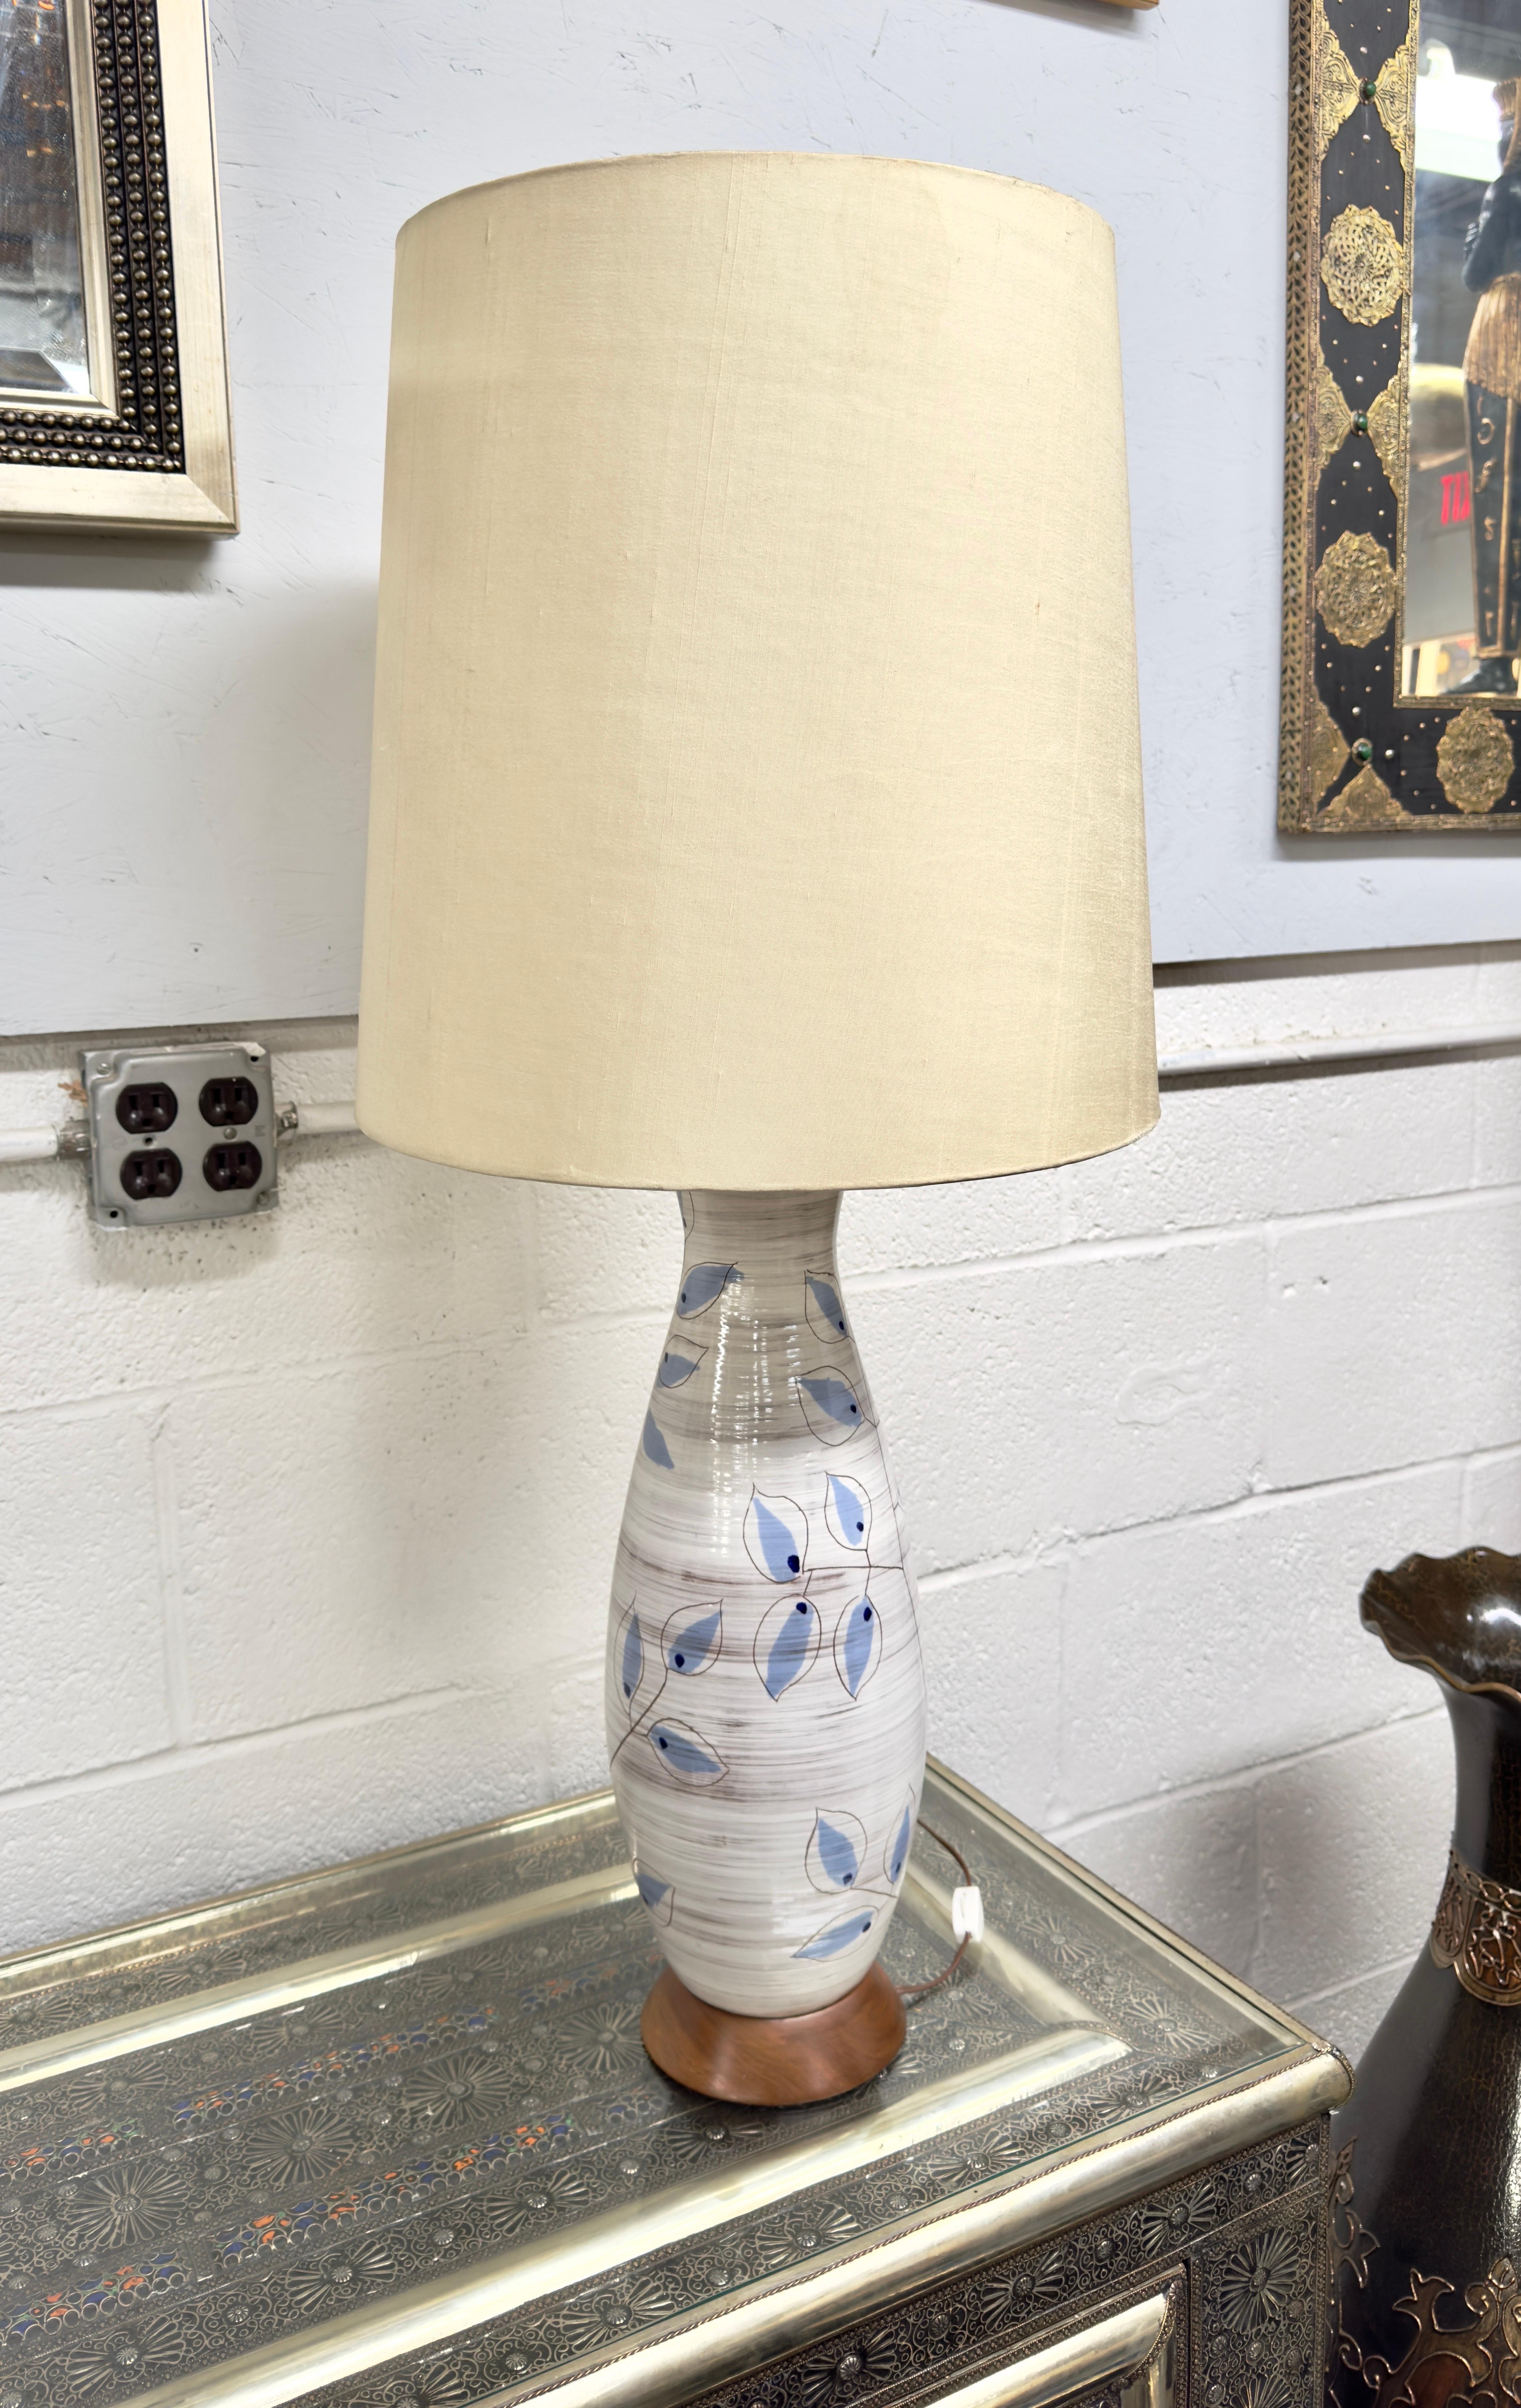 An artisan table lamp crafted by Bitossi of Italy in 1950s. 
Handmade with meticulous care, the botanical design lamp boasts a delicate ceramic construction. The lamp features leaves design , hand-painted in a mesmerizing shade of blue, evoking a